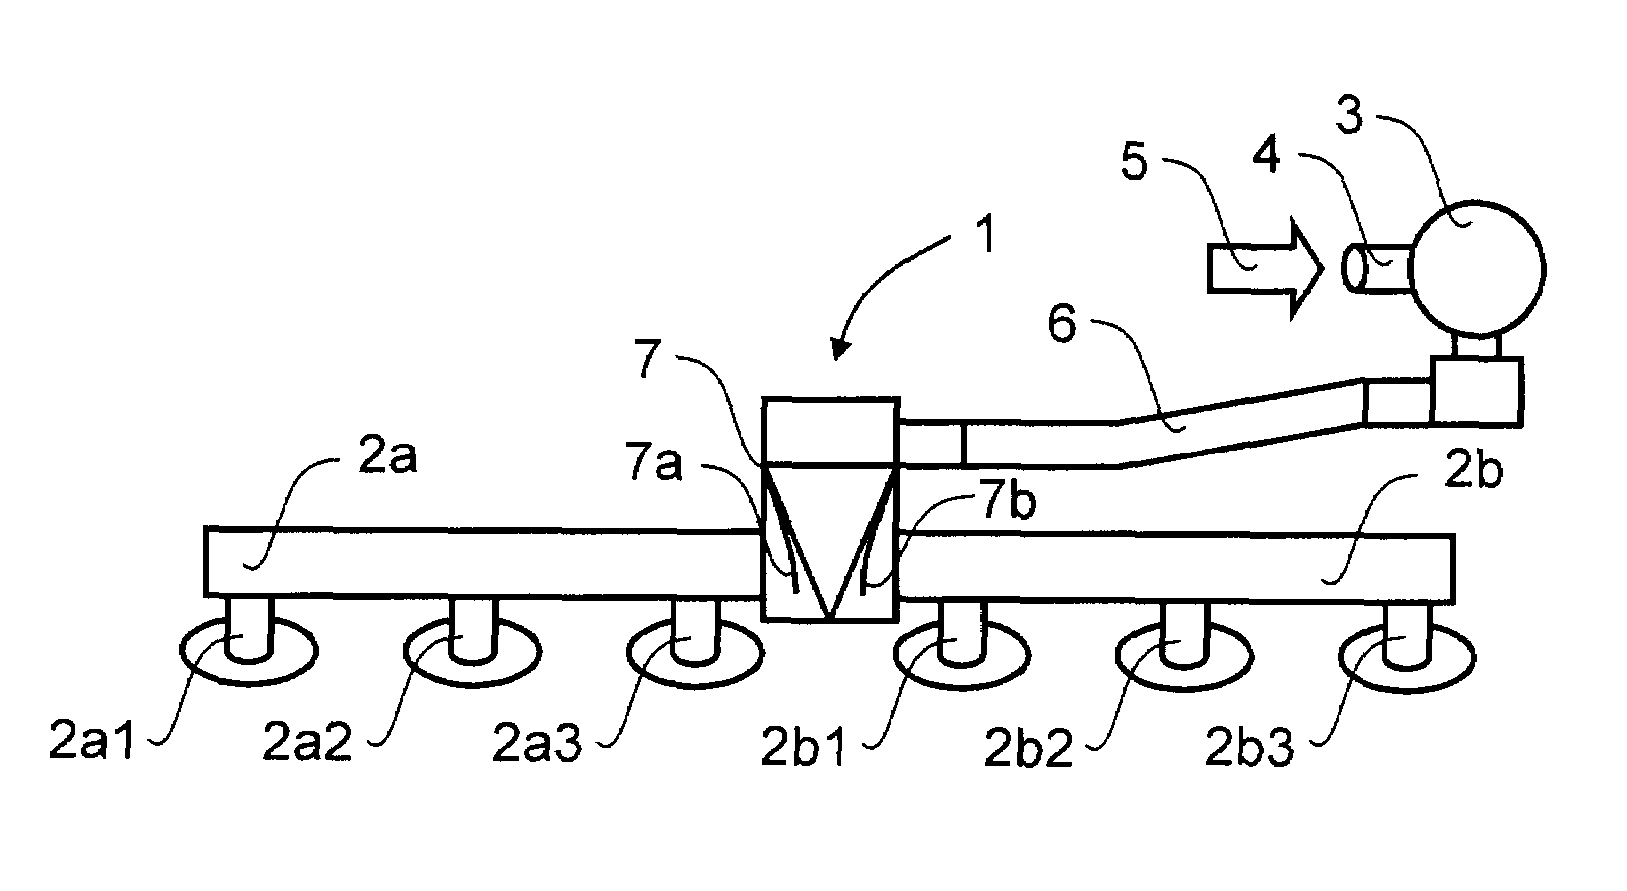 Secondary air injection system for an internal combustion engine